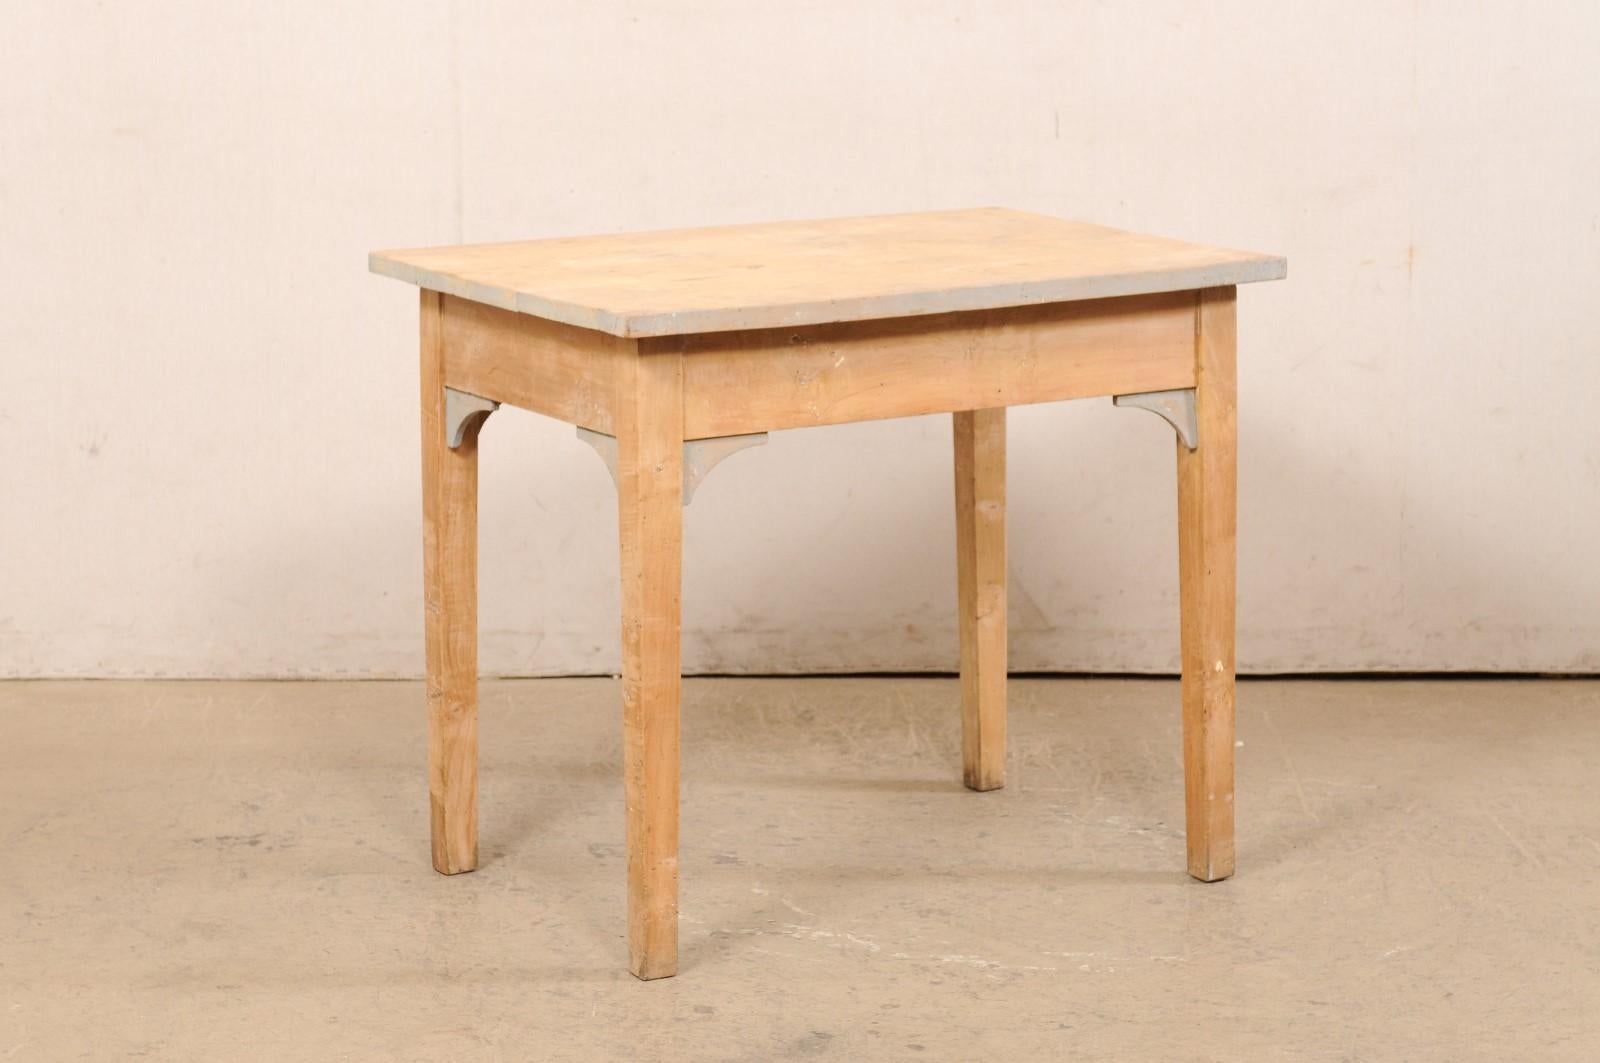 A Swedish occasional table of curly birch wood from the early 20th century. This antique table from Sweden is rectangular in shape and has been designed in clean/linear lines. The top overhangs the apron below, which is plain but with curved